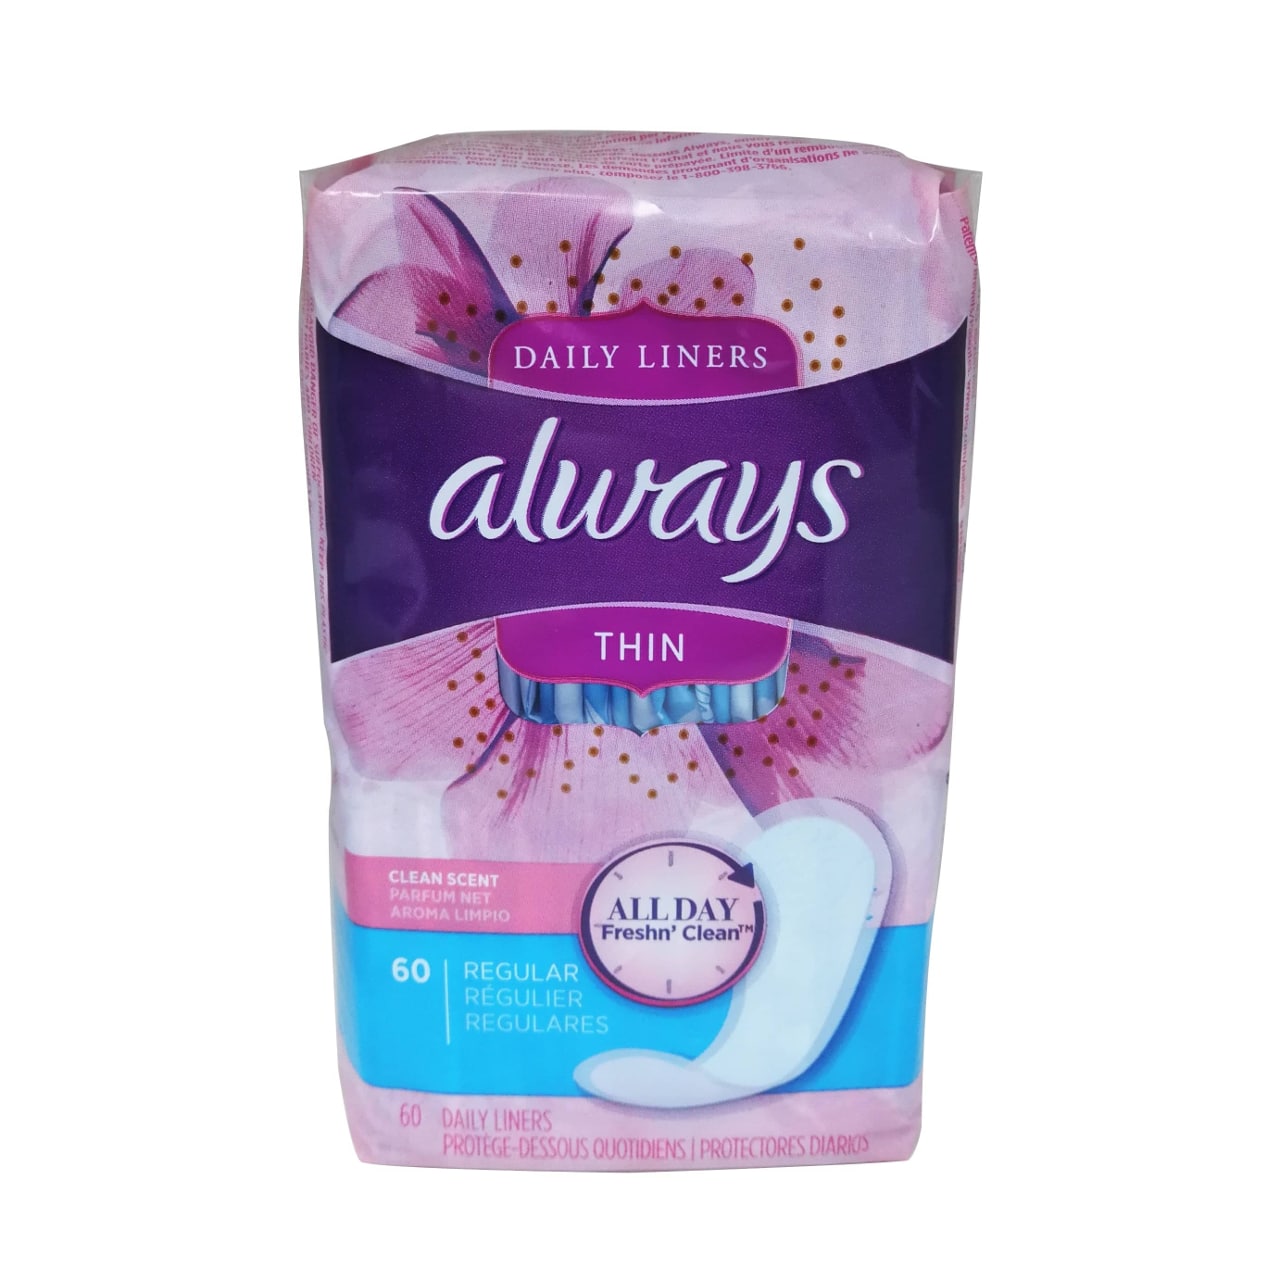 Package label for Always Daily Liners Thin Regular 